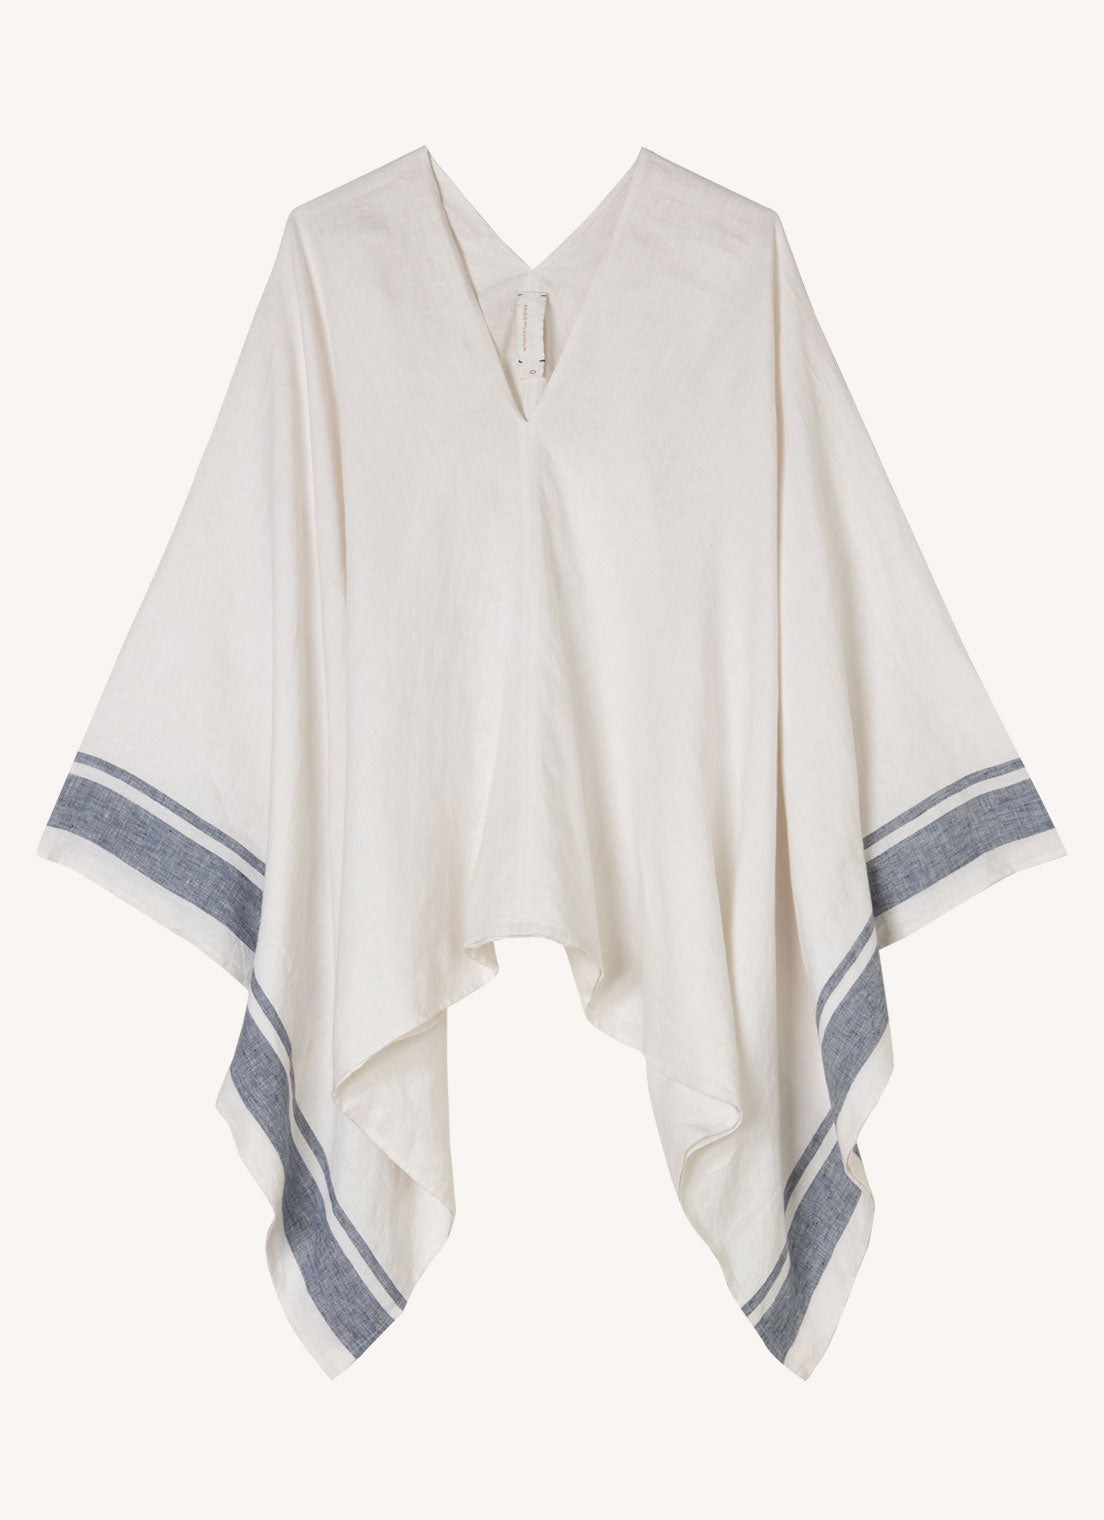 An easy fit, square cut, v-neck poncho with long sleeves made from yarn dye stripe washed linen in white with indigo stripe